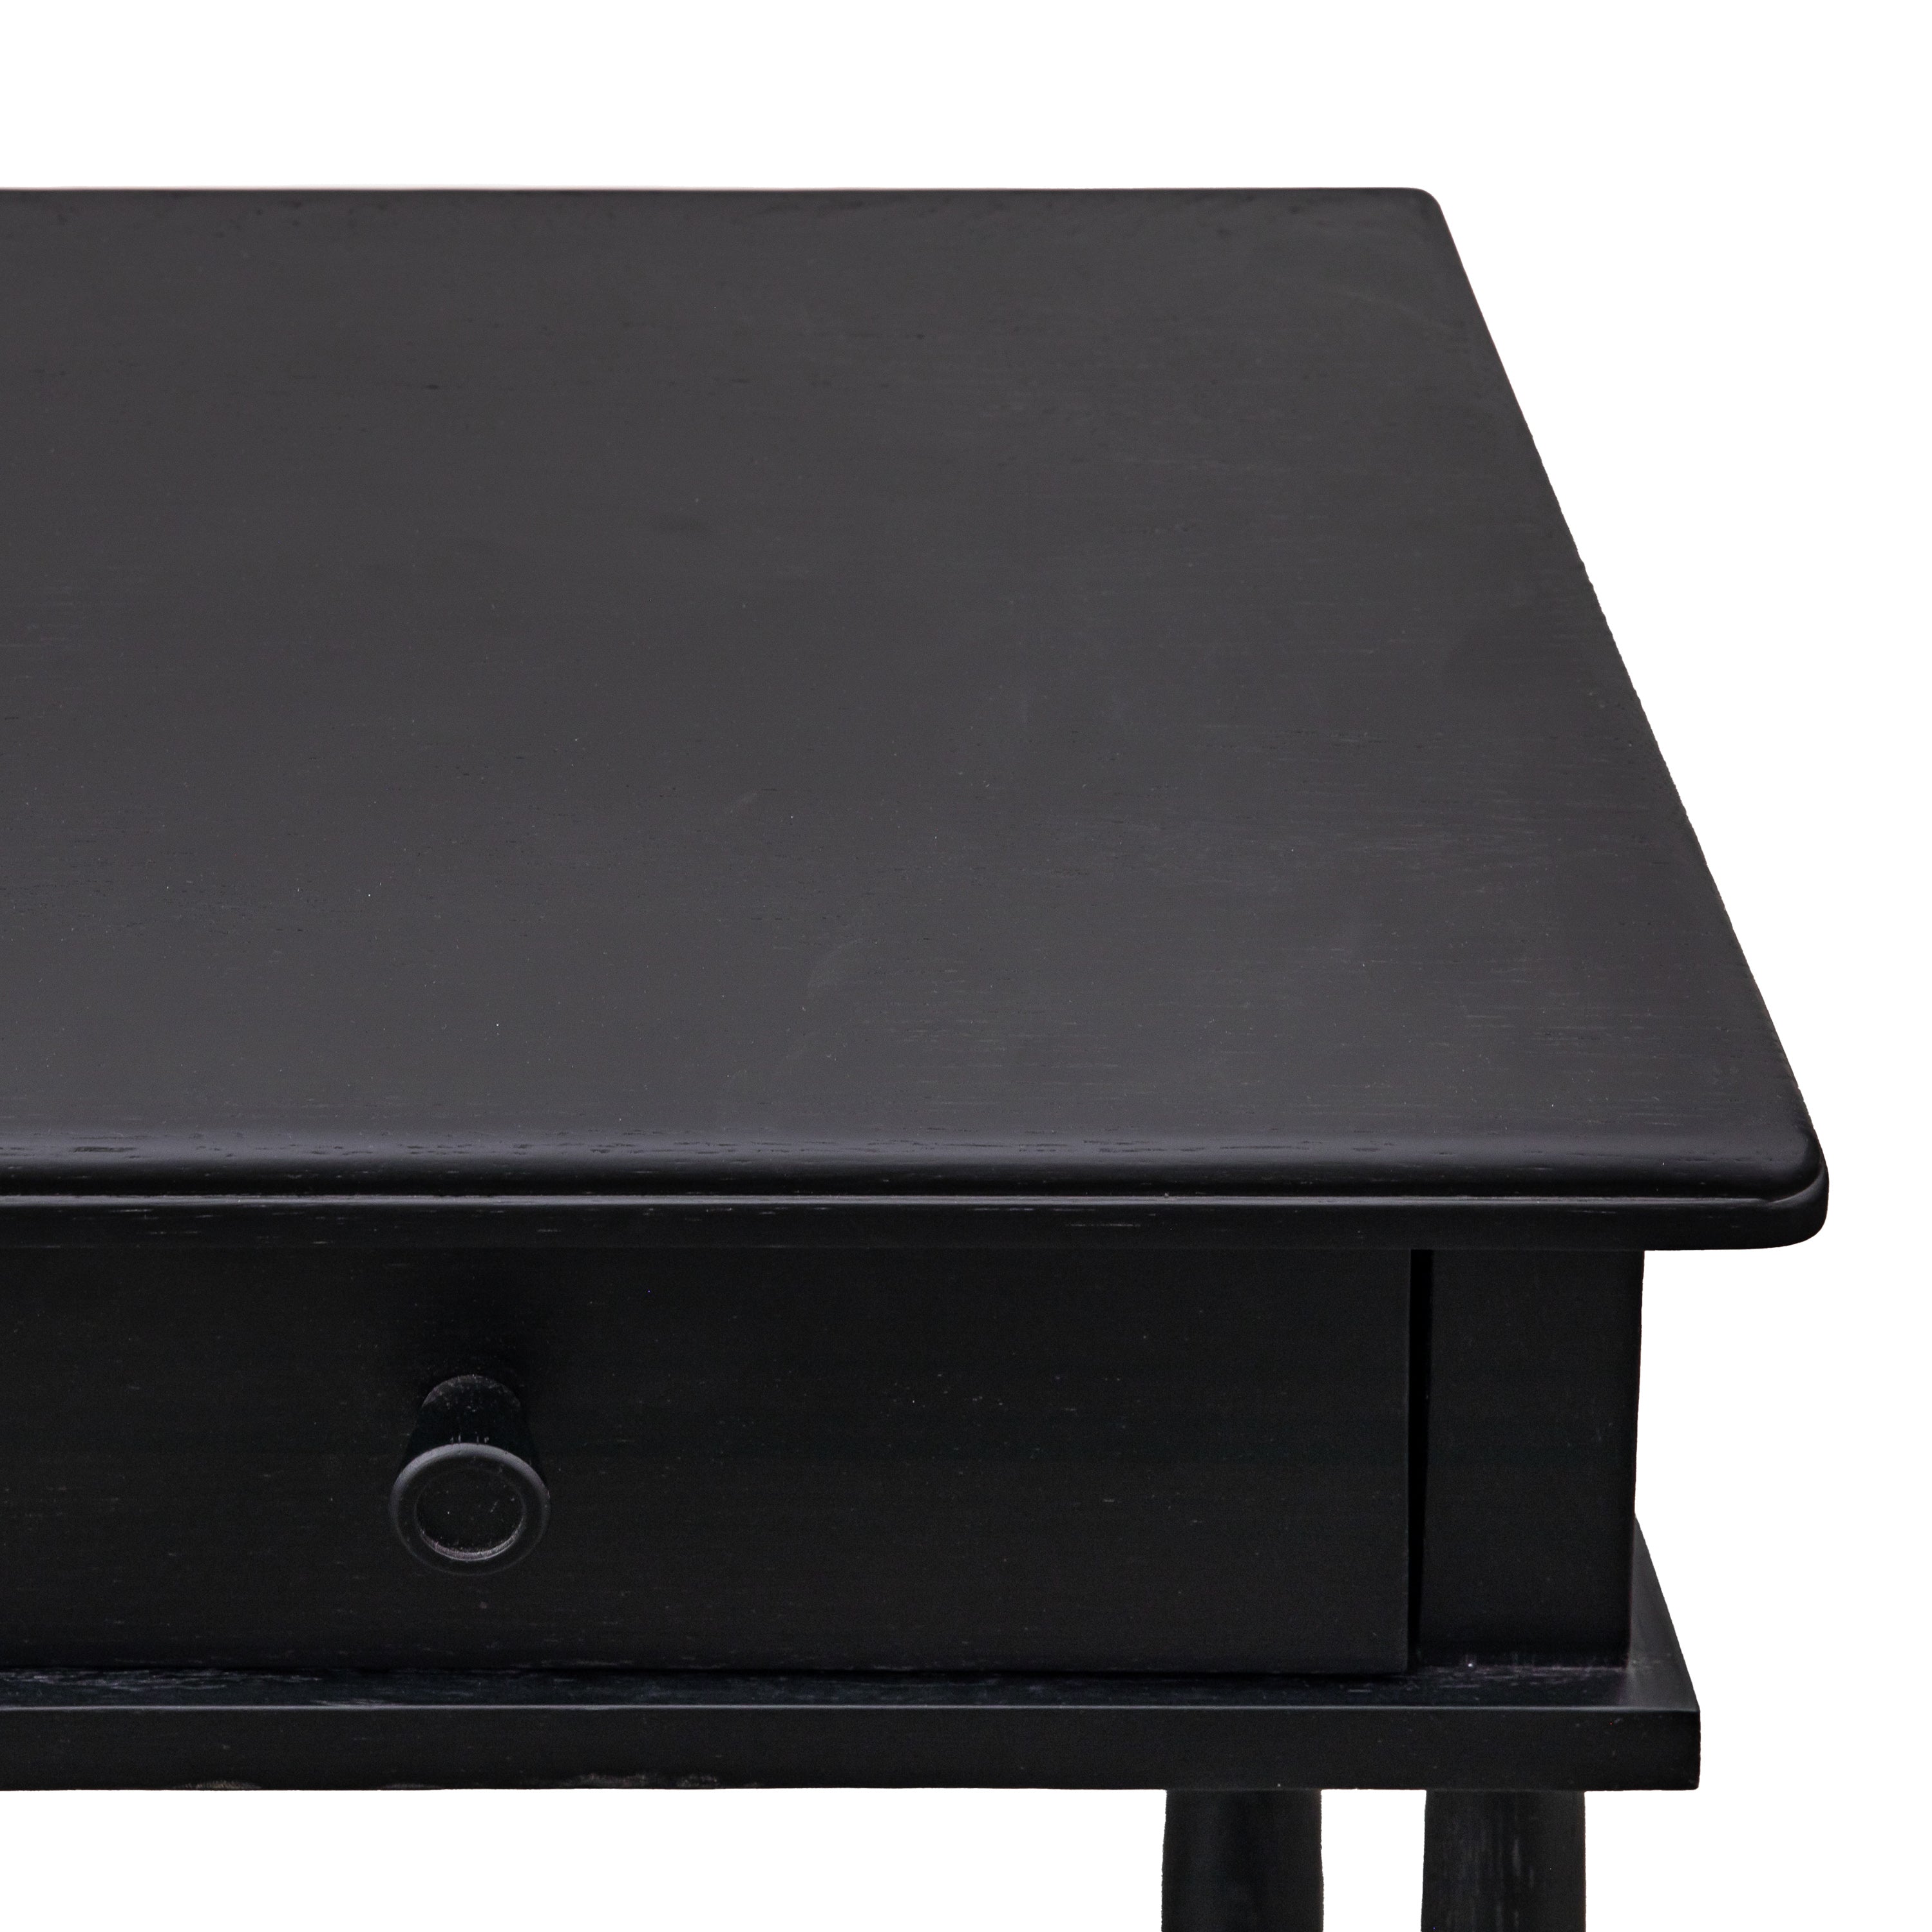 Axel Nordic style black bedside table with pull out drawer | MalletandPlane.com